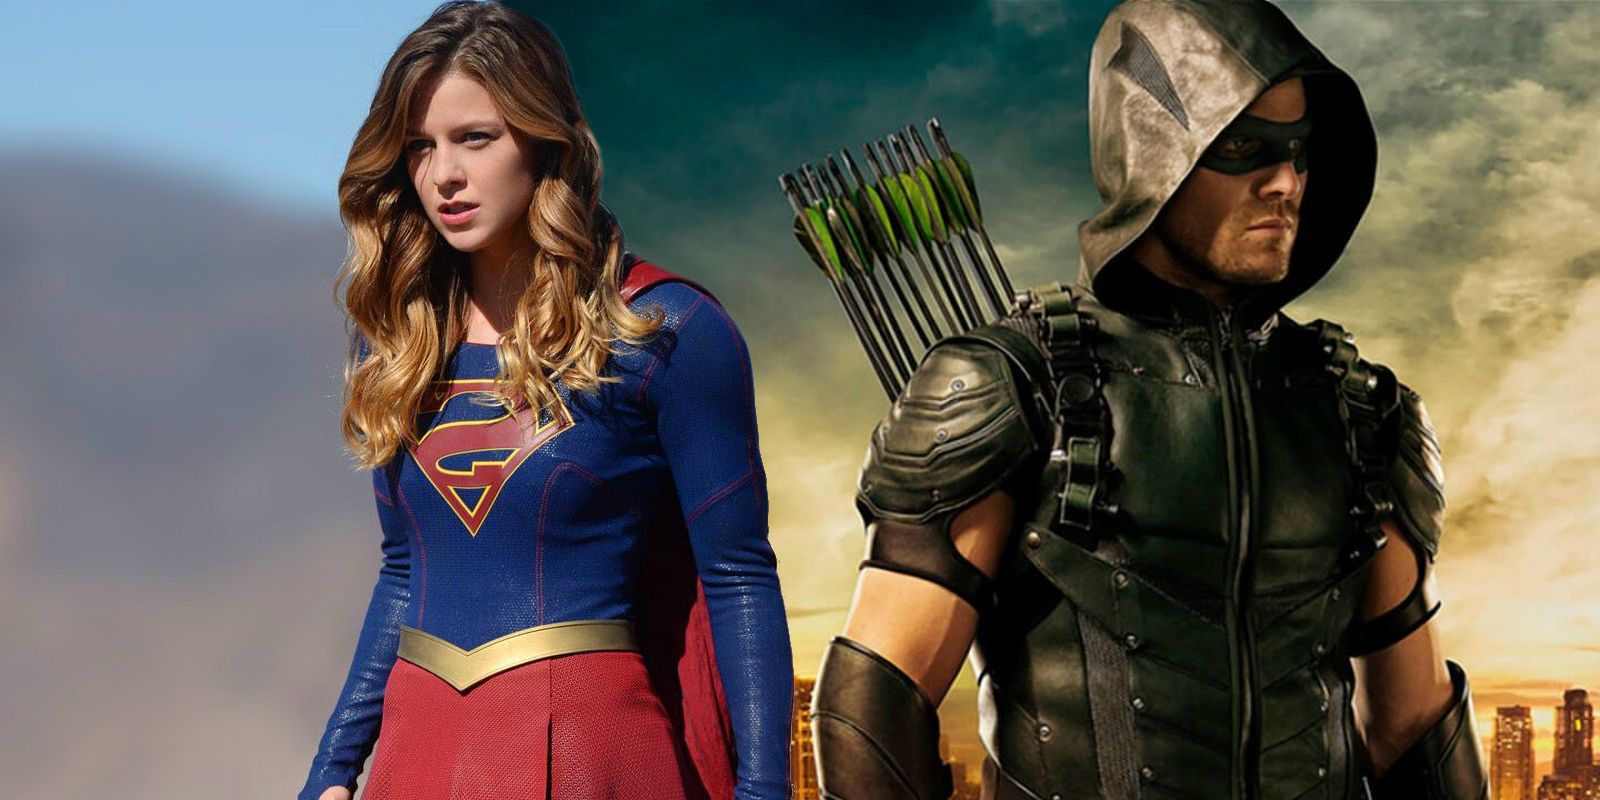 Supergirl And Green Arrow Team Up In New Image Screen Rant